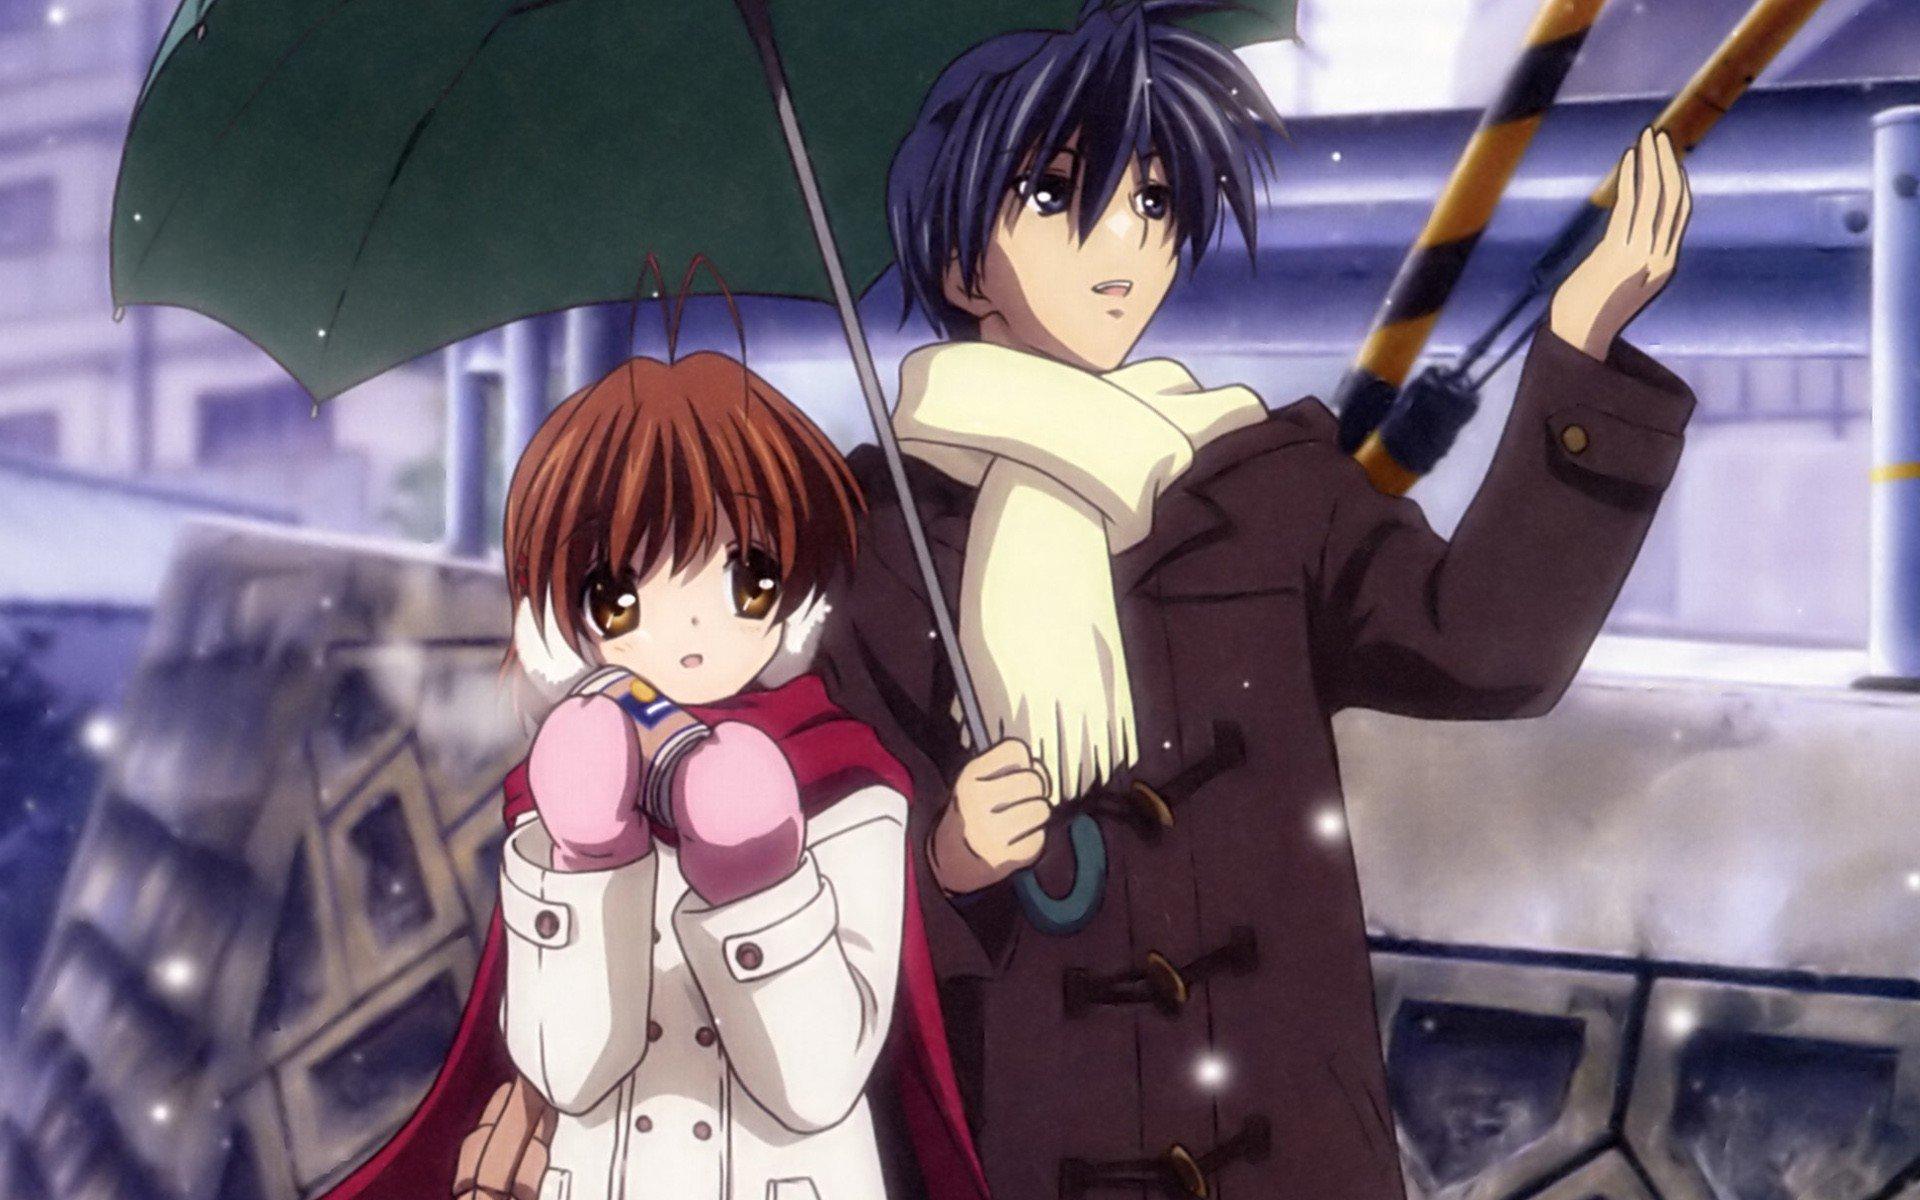 Clannad Art - ID: 78608  Clannad, Clannad after story, Anime images